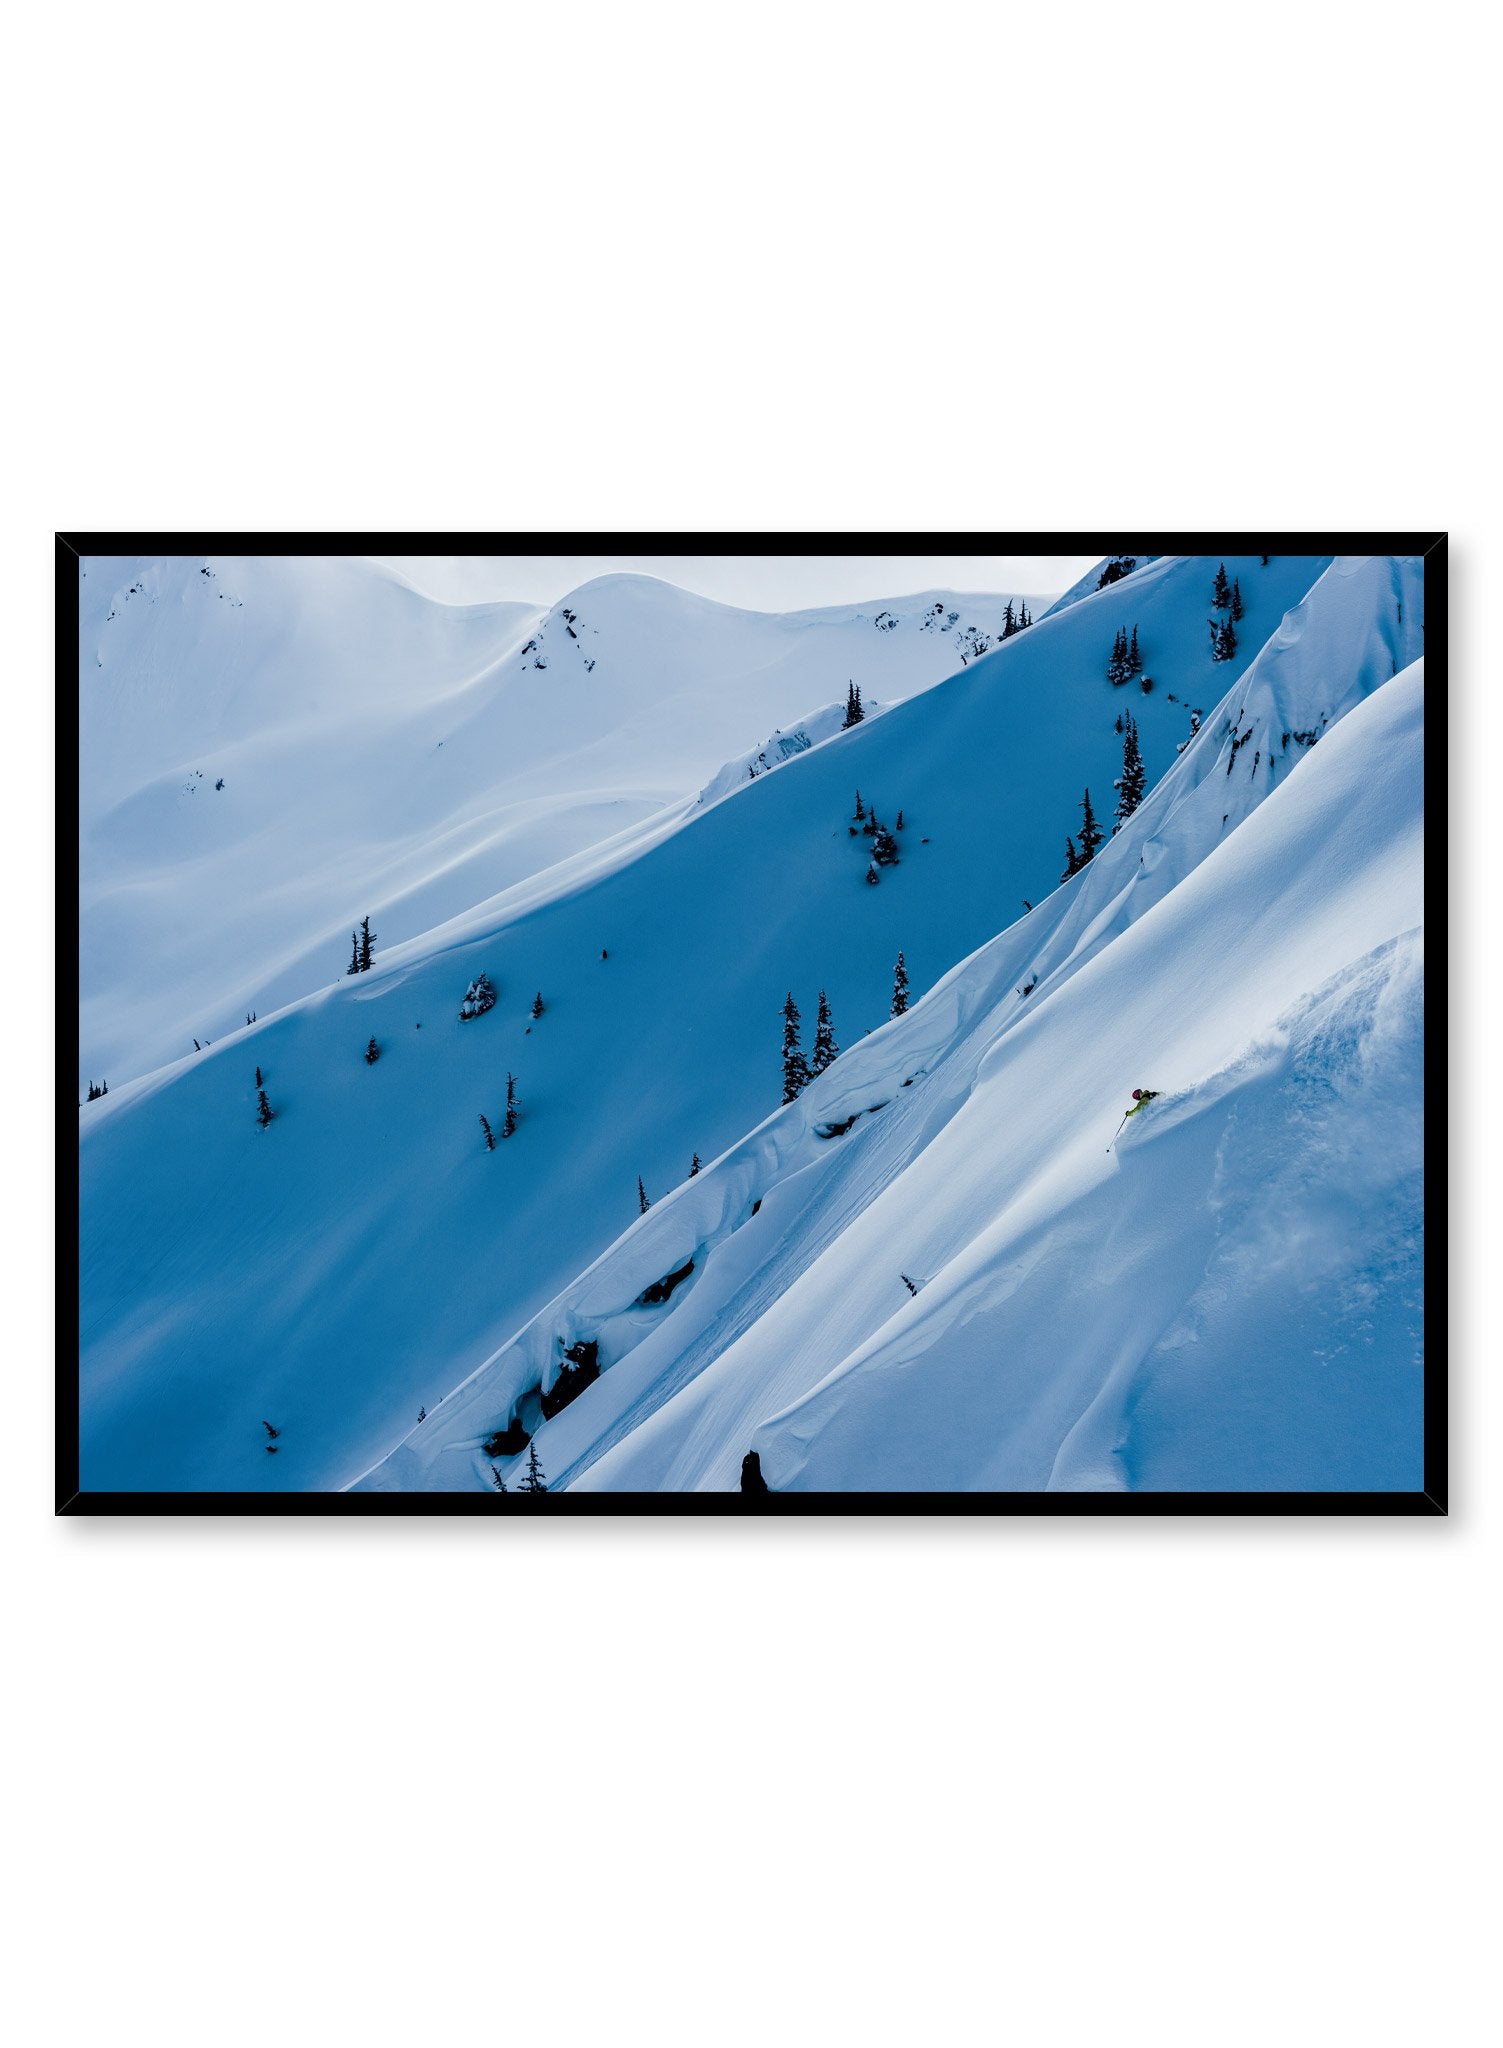 Landscape photography poster by Opposite Wall with white snow on mountain